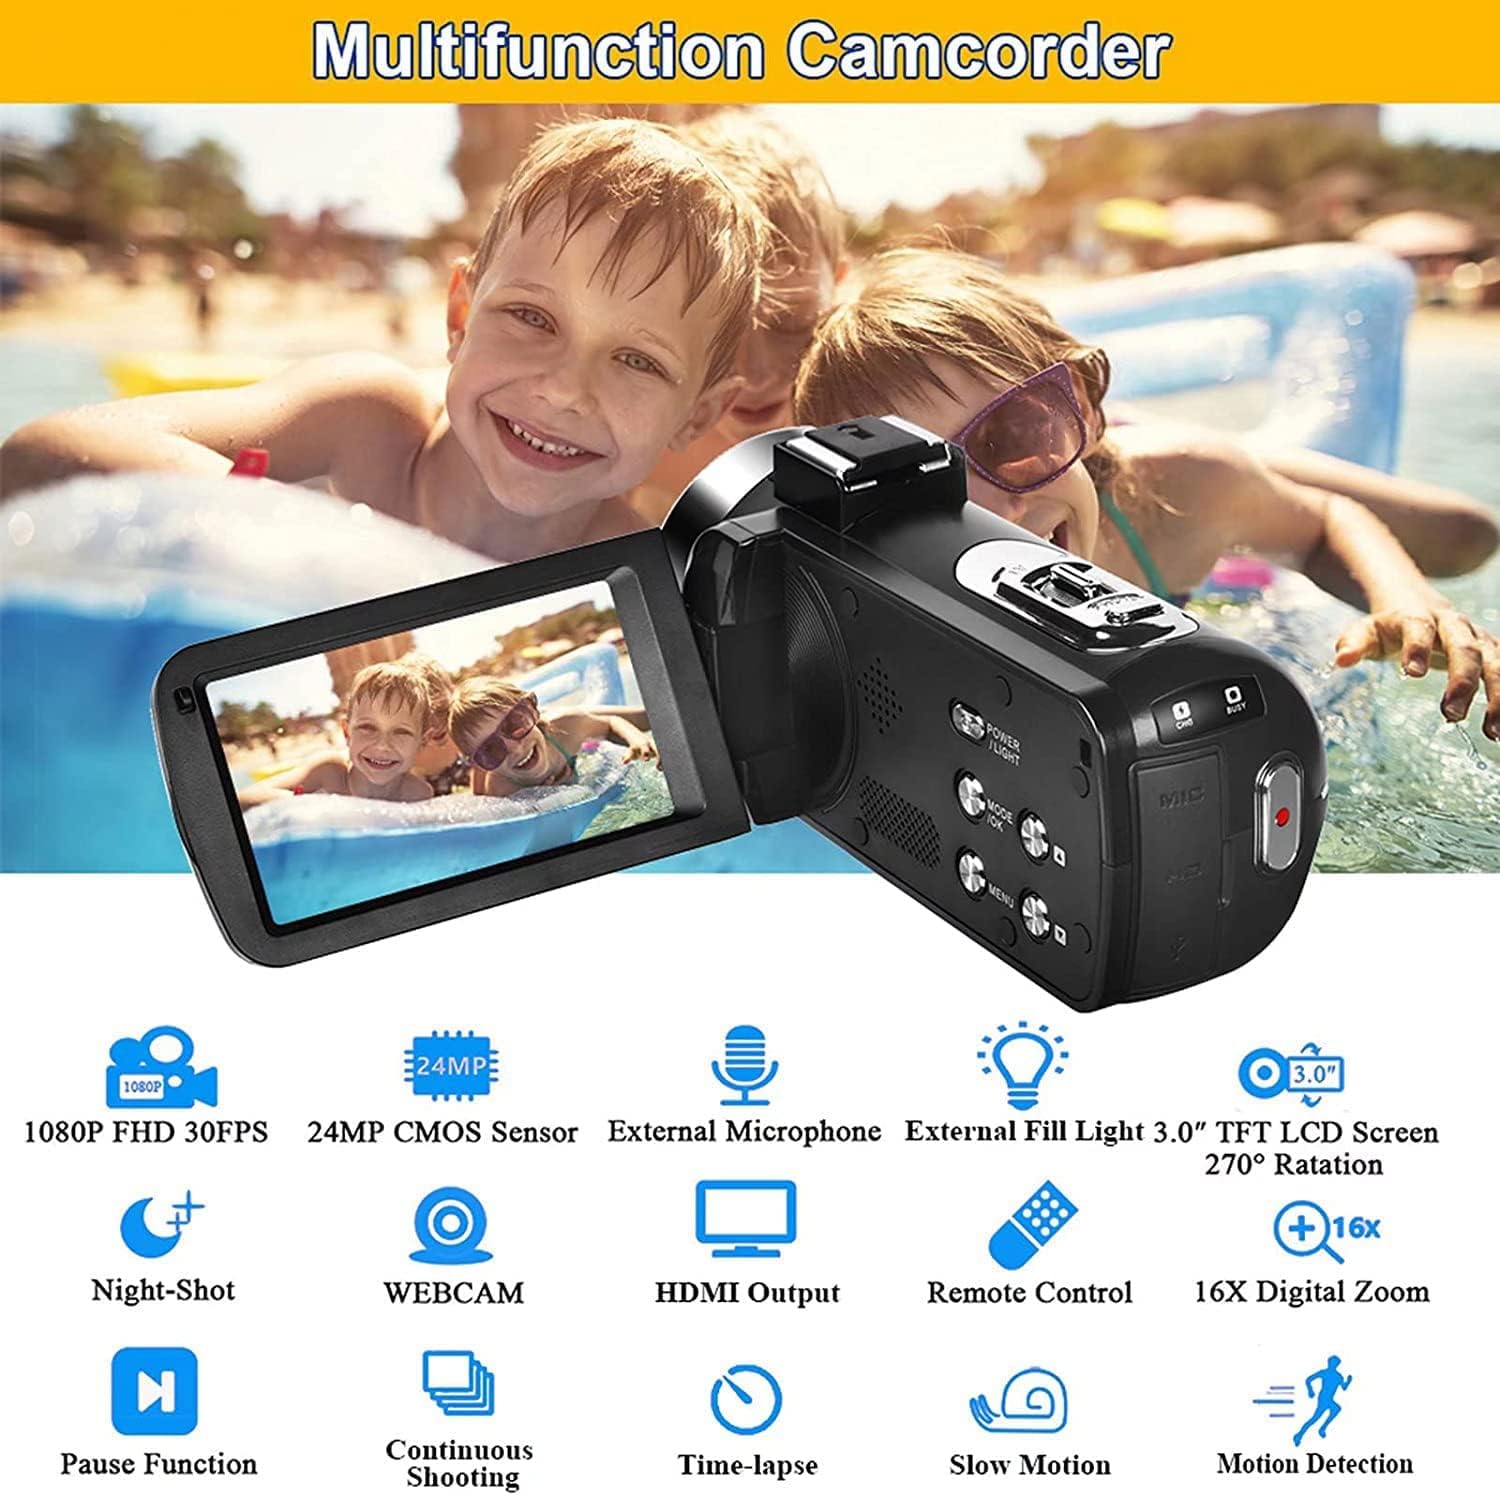 Verdict: Video Camera Camcorder Full HD 1080P 30FPS 24.0 MP IR Night Vision Vlogging Camera Recorder 3.0 Inch IPS Screen 16X Zoom Camcorders Camera Remote Control with 2 Batteries